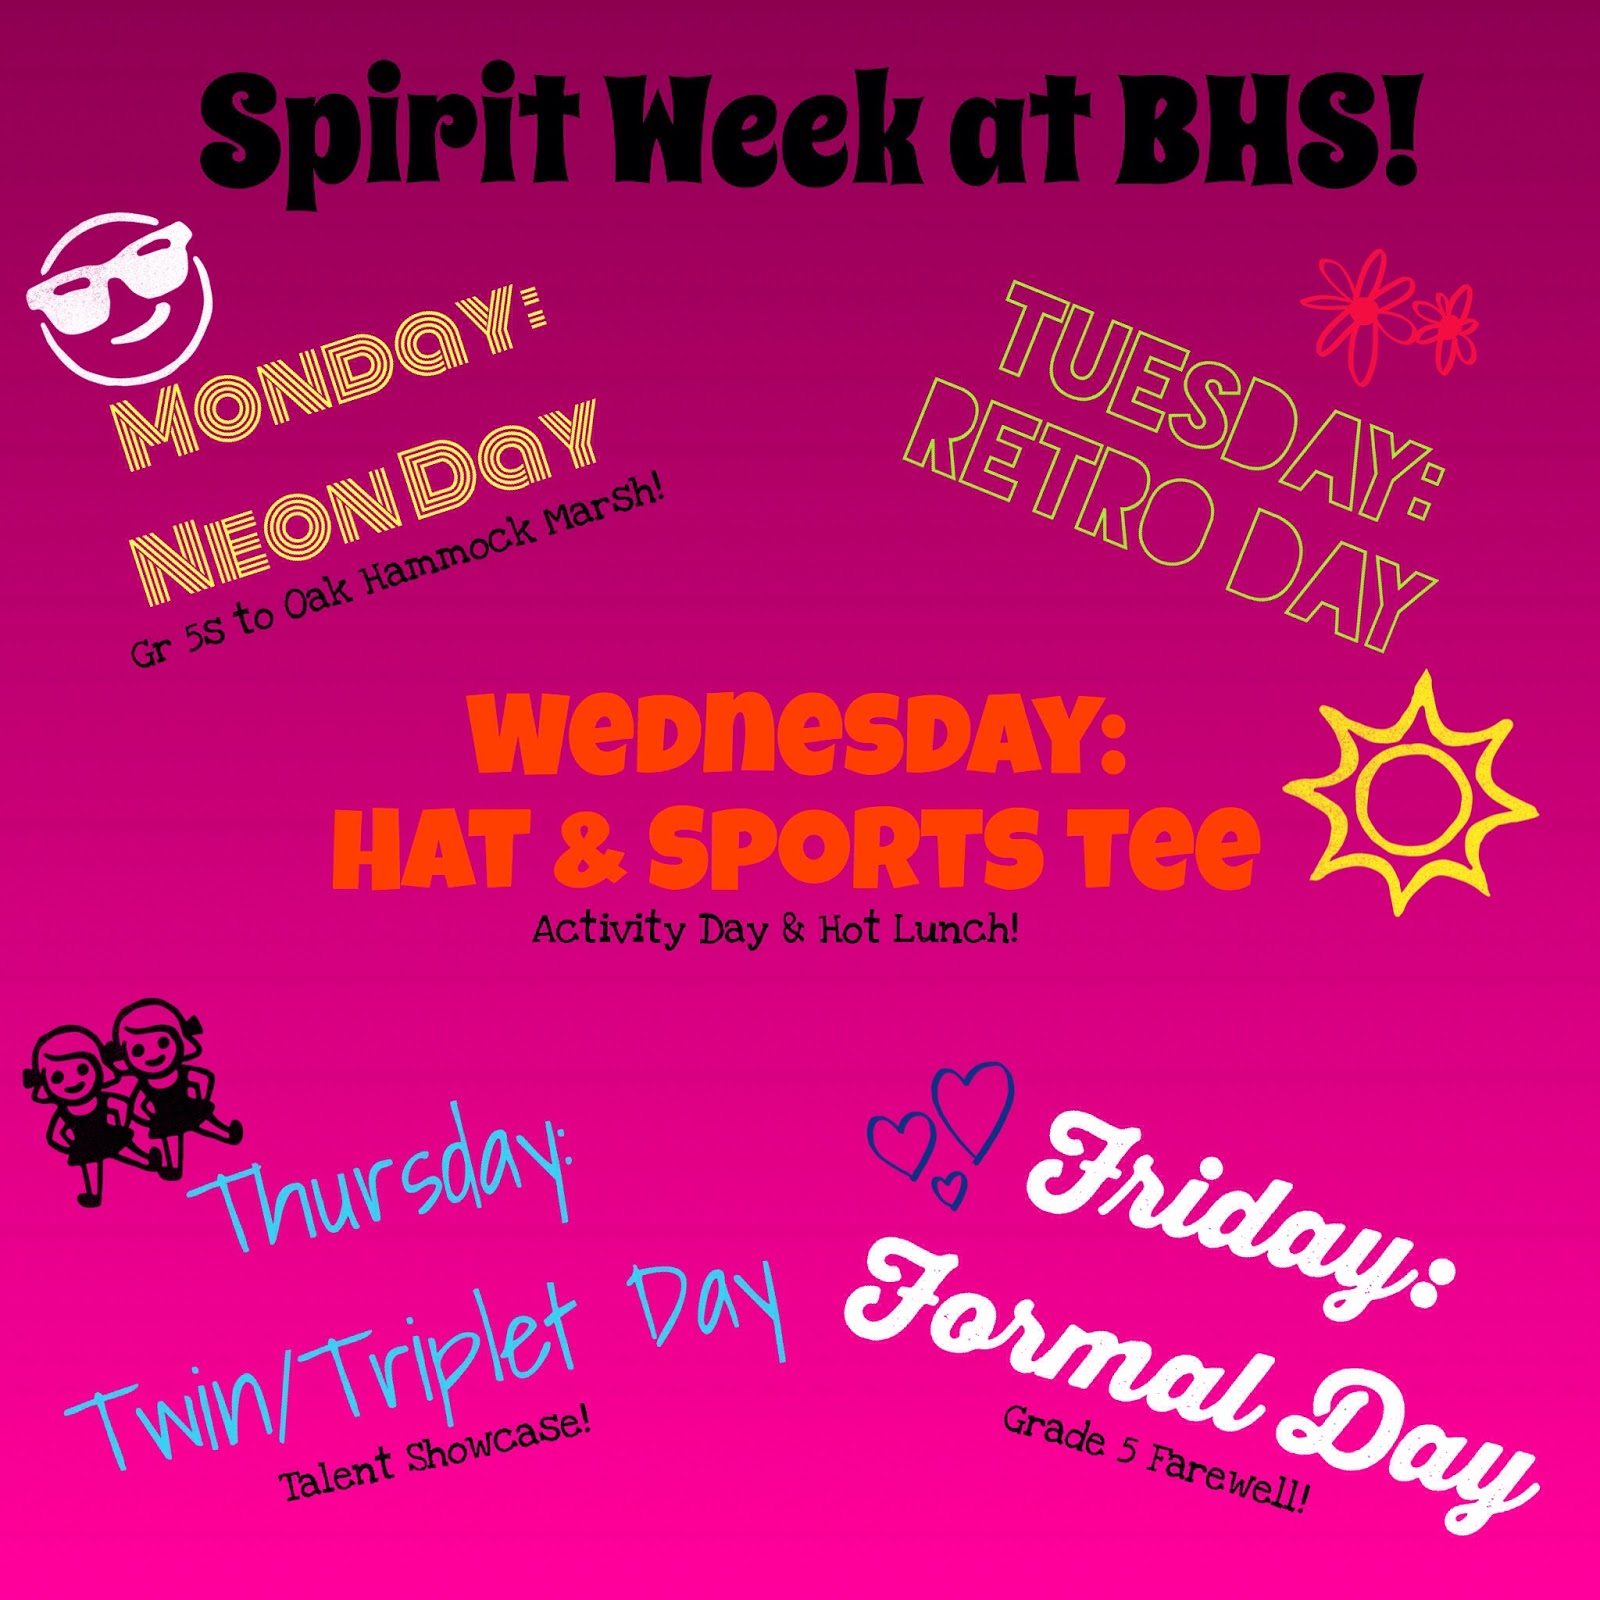 Ms. Wasney's Class: SPIRIT WEEK at BHS!